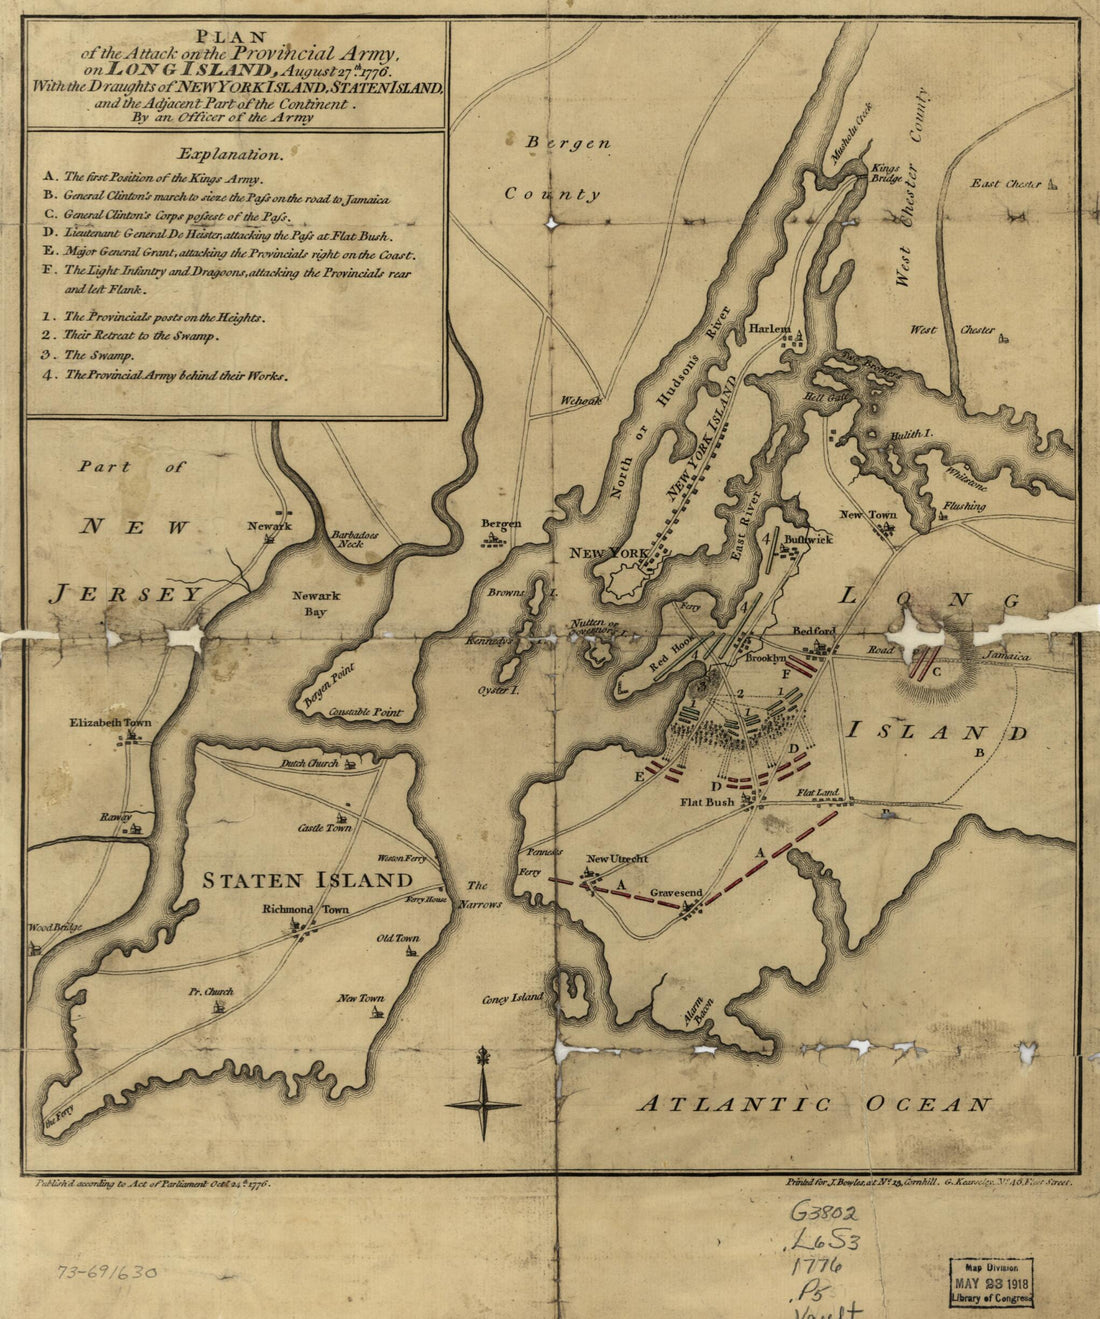 This old map of Plan of the Attack On the Provincial Army On Long Island, August 27th from 1776. With the Draughts of New York Island, Staten Island, and the Adjacent Part of the Continent was created by John Bowles in 1776